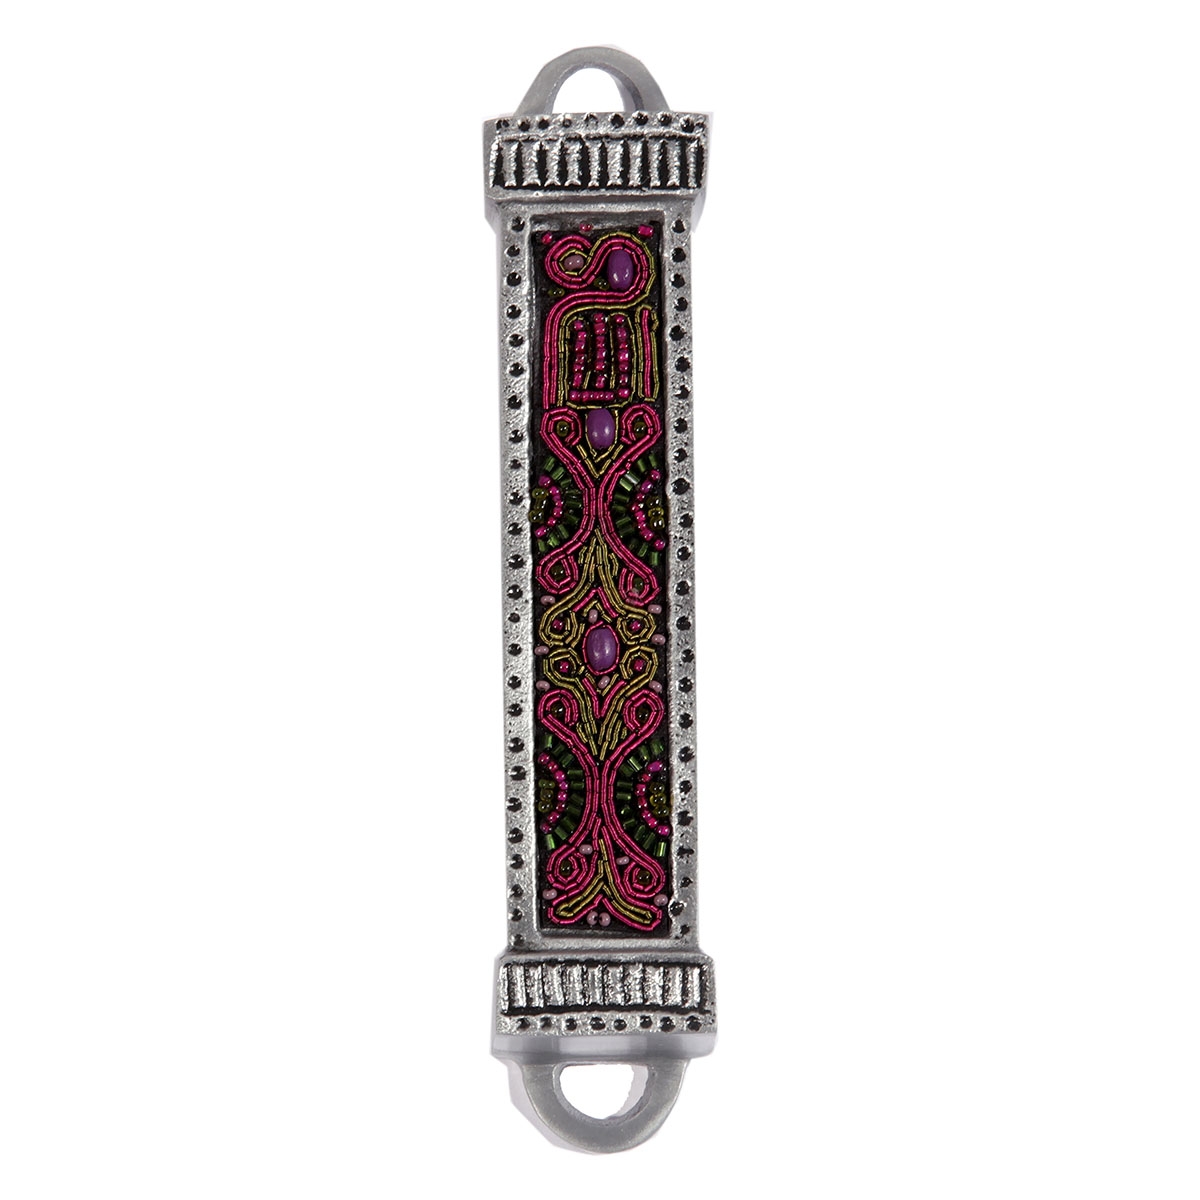 Yair Emanuel Aluminum Mezuzah with Embroidered Beads-Red/Gold - 1